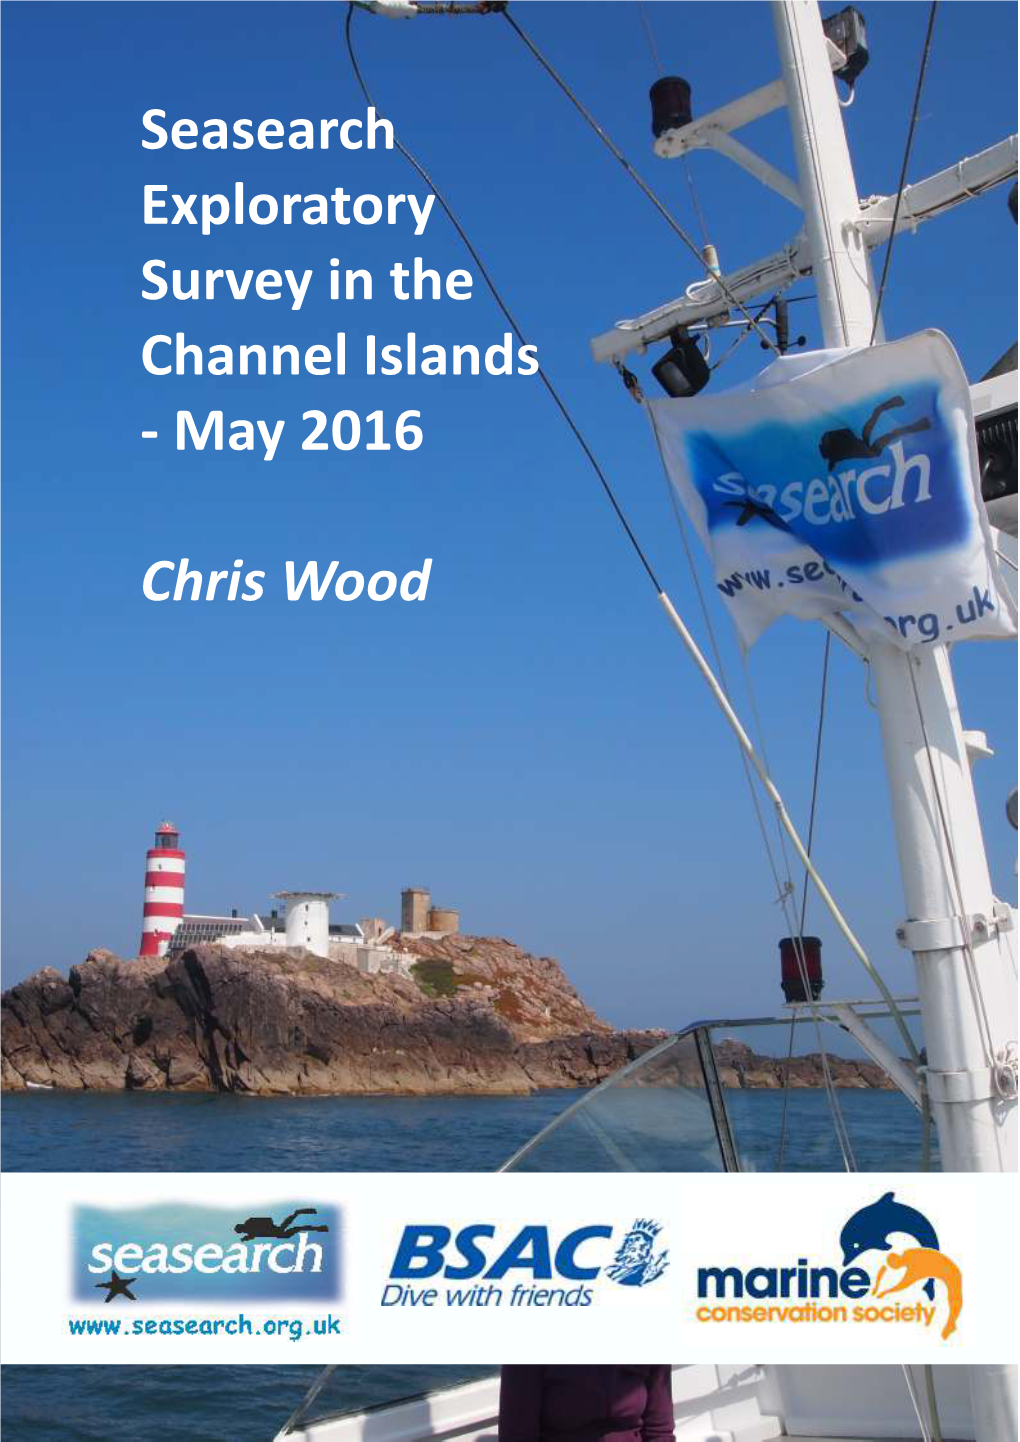 Seasearch Exploratory Survey in the Channel Islands - May 2016